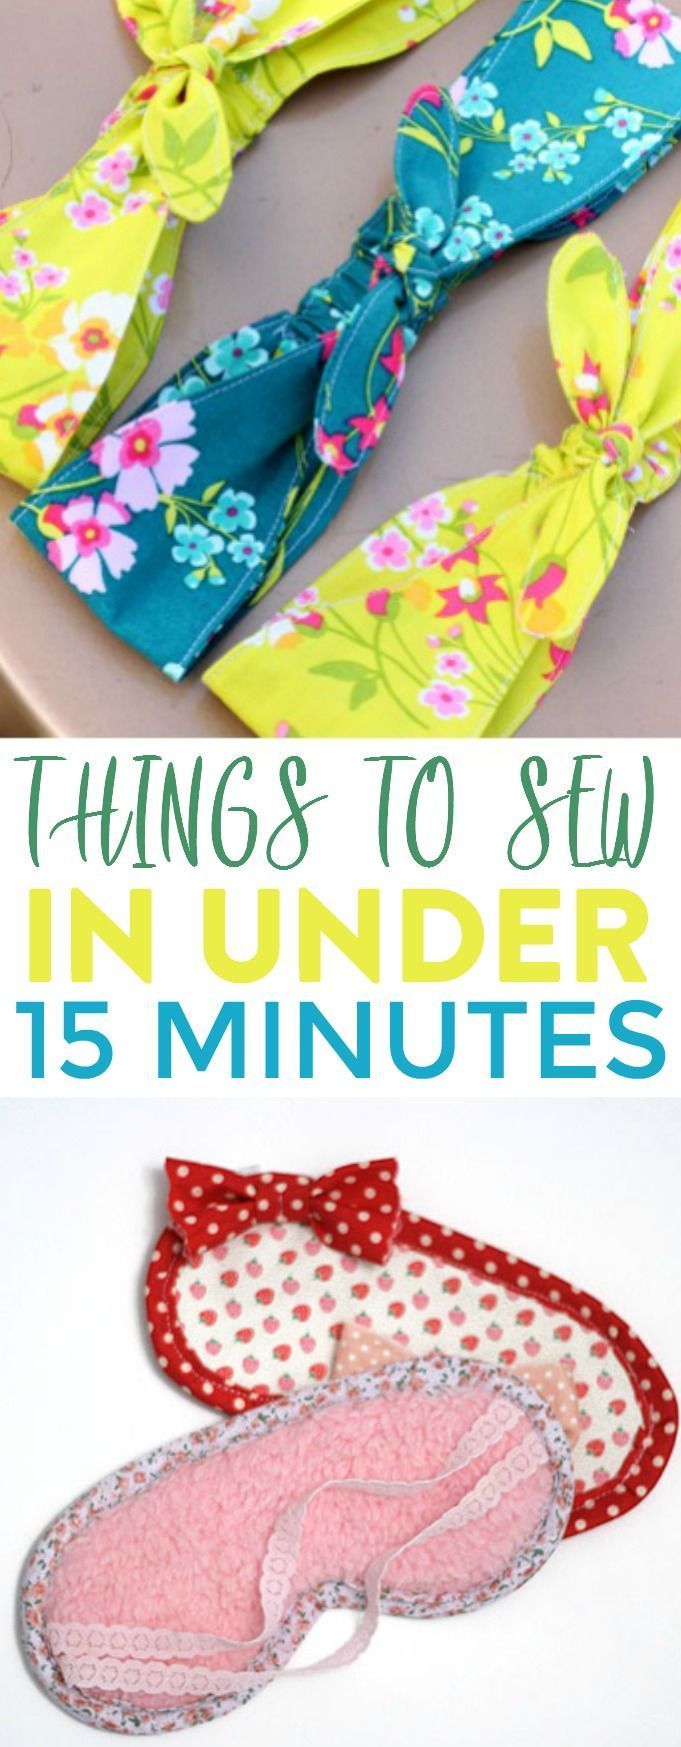 Things To Sew In Under 15 Minutes - A Little Craft In Your Day -   19 fabric crafts posts ideas